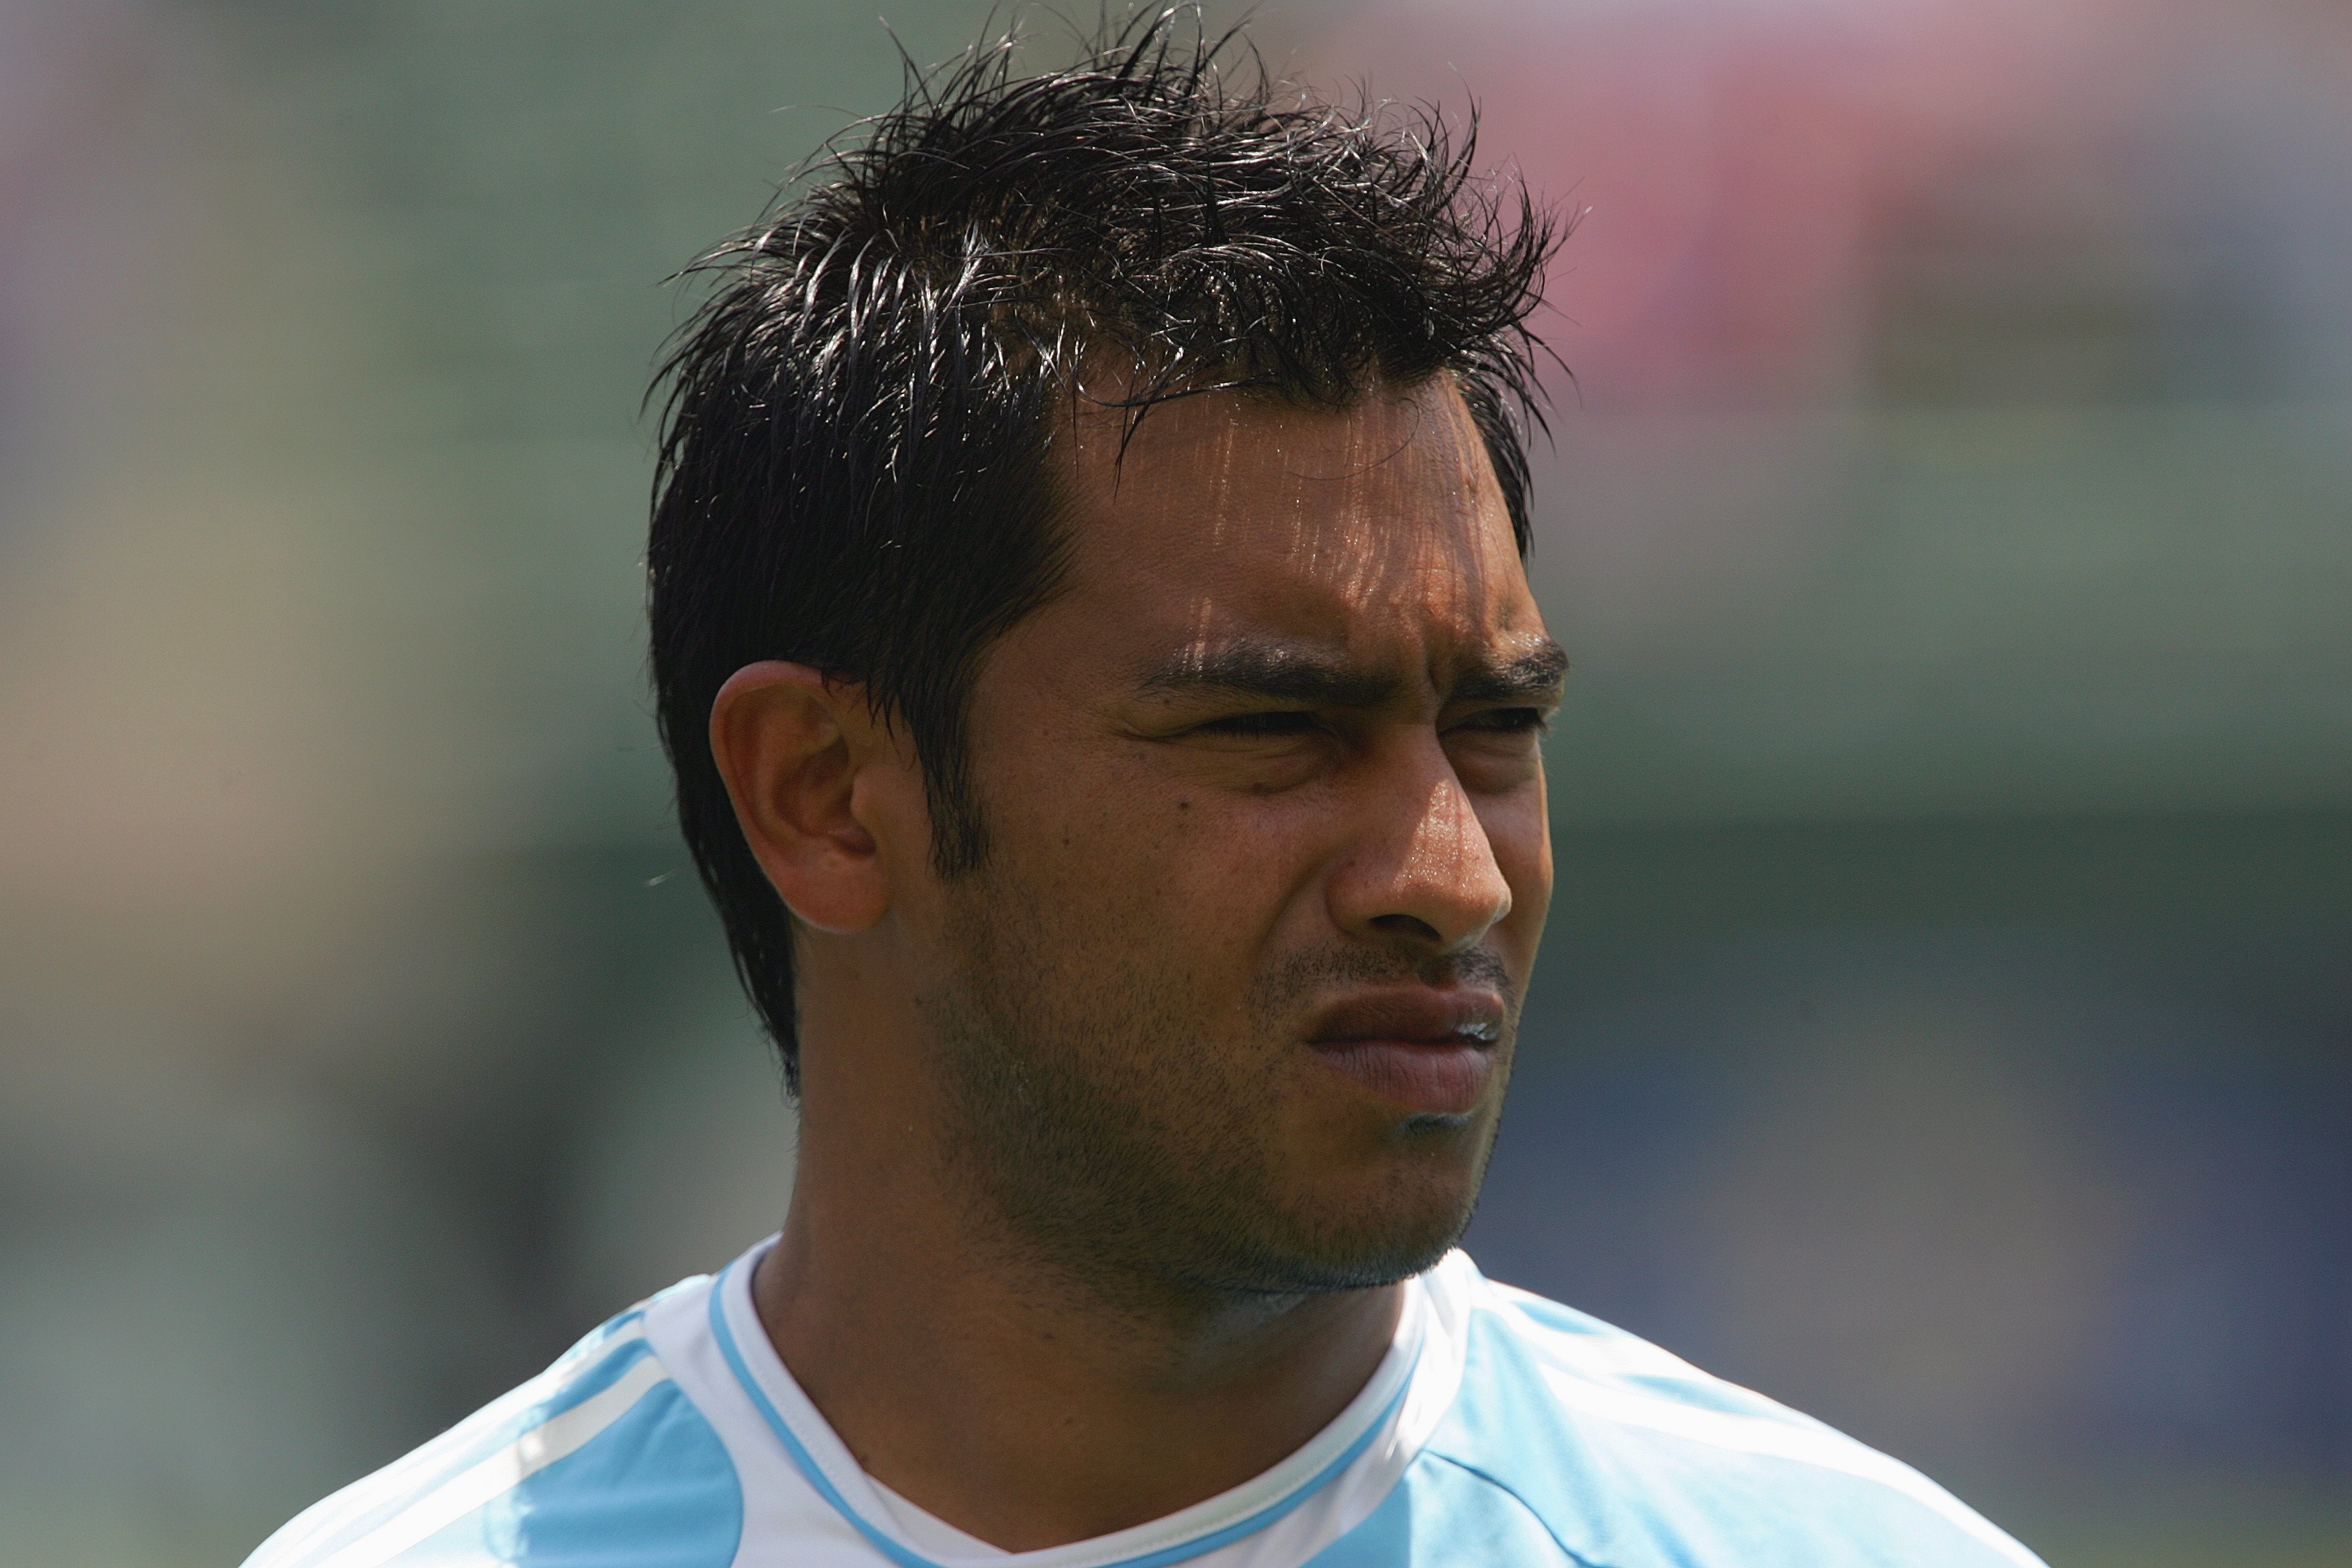 CARSON, CA - JUNE 9:  Carlos Ruiz #20 of Guatemala looks on prior to their CONCACAF Gold Cup first round match against El Salvador on June 9, 2007 at the Home Depot Center in Carson, California. Guatemala defeated El Salvador 1-0. (Photo by Stephen Dunn/G